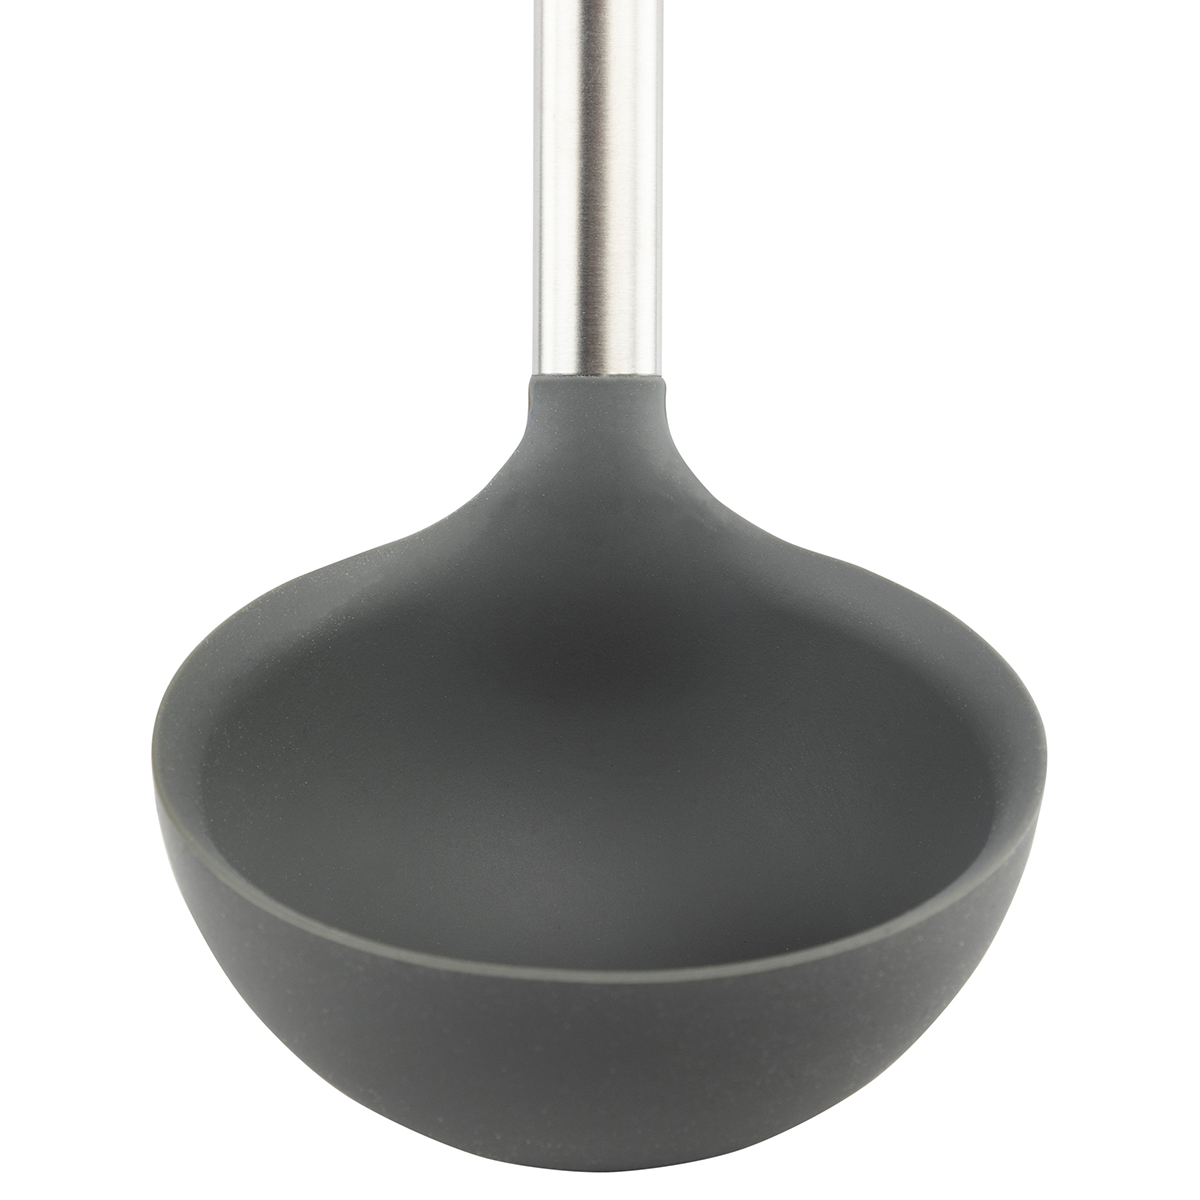 https://www.containerstore.com/catalogimages/423628/10086199-Silicone_Ladle-VEN3.jpg